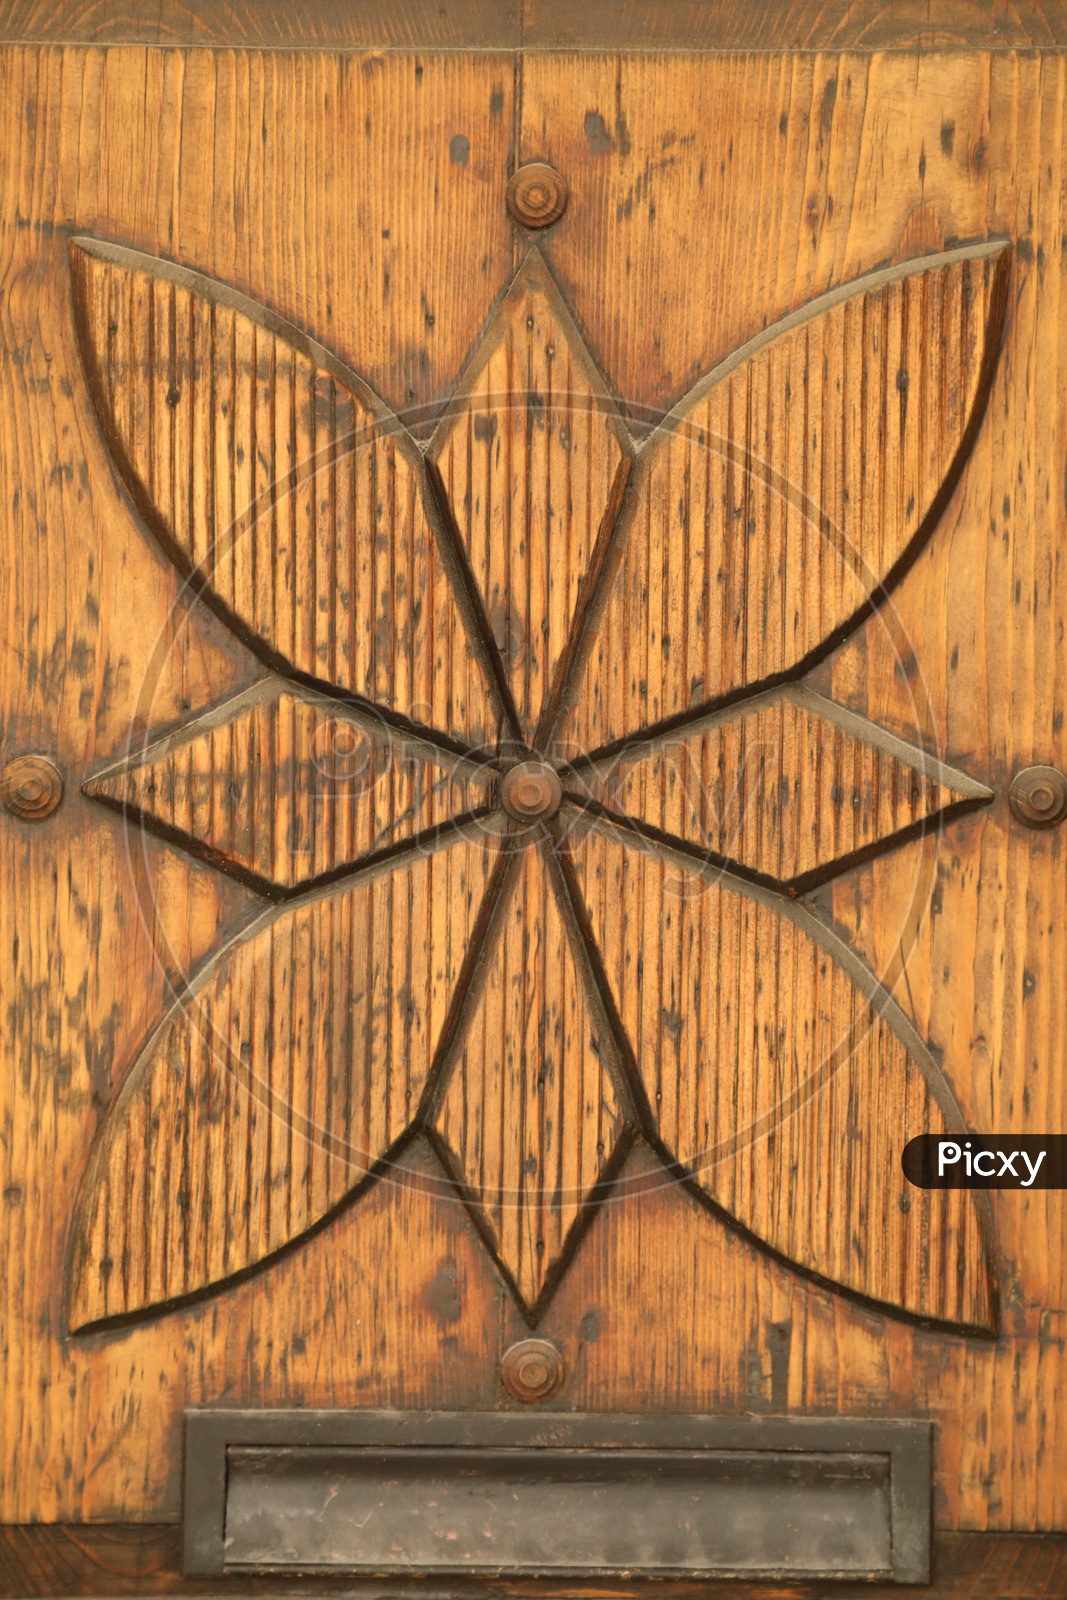 Image of A Flower Design on a Wooden Door-CT666450-Picxy